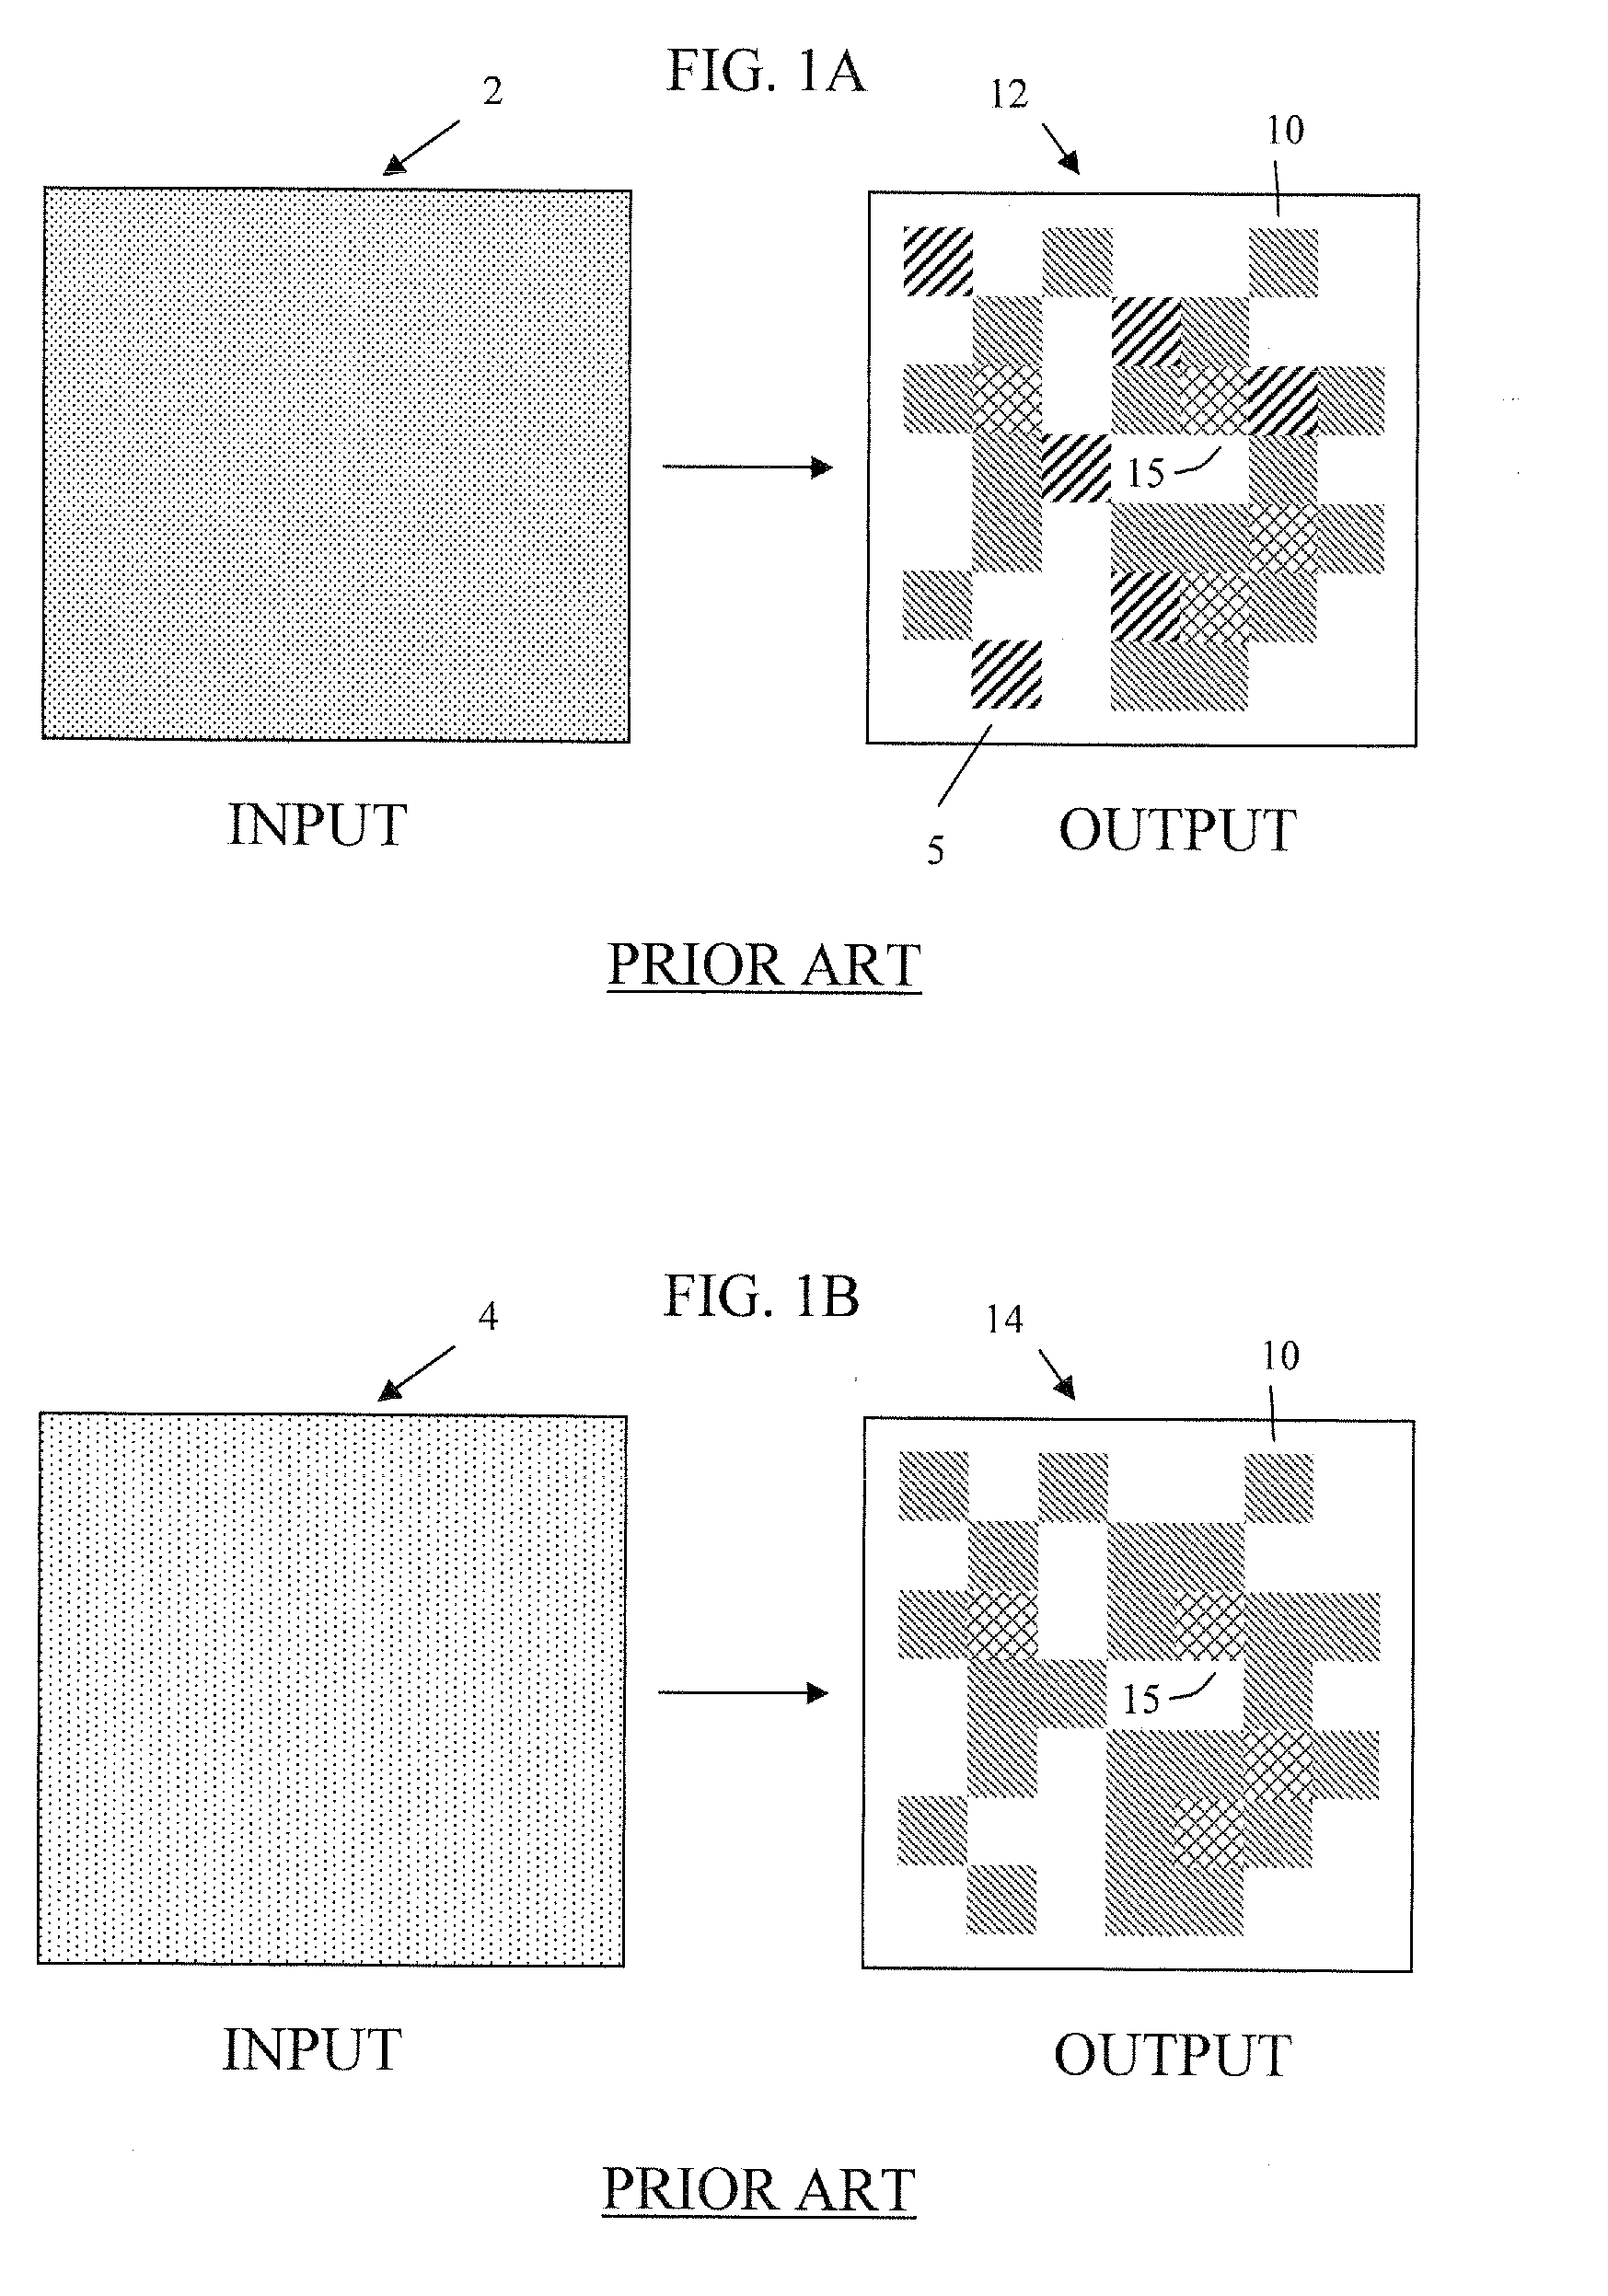 Multi-bit-depth error diffusion for the reproduction of color or monochrome images